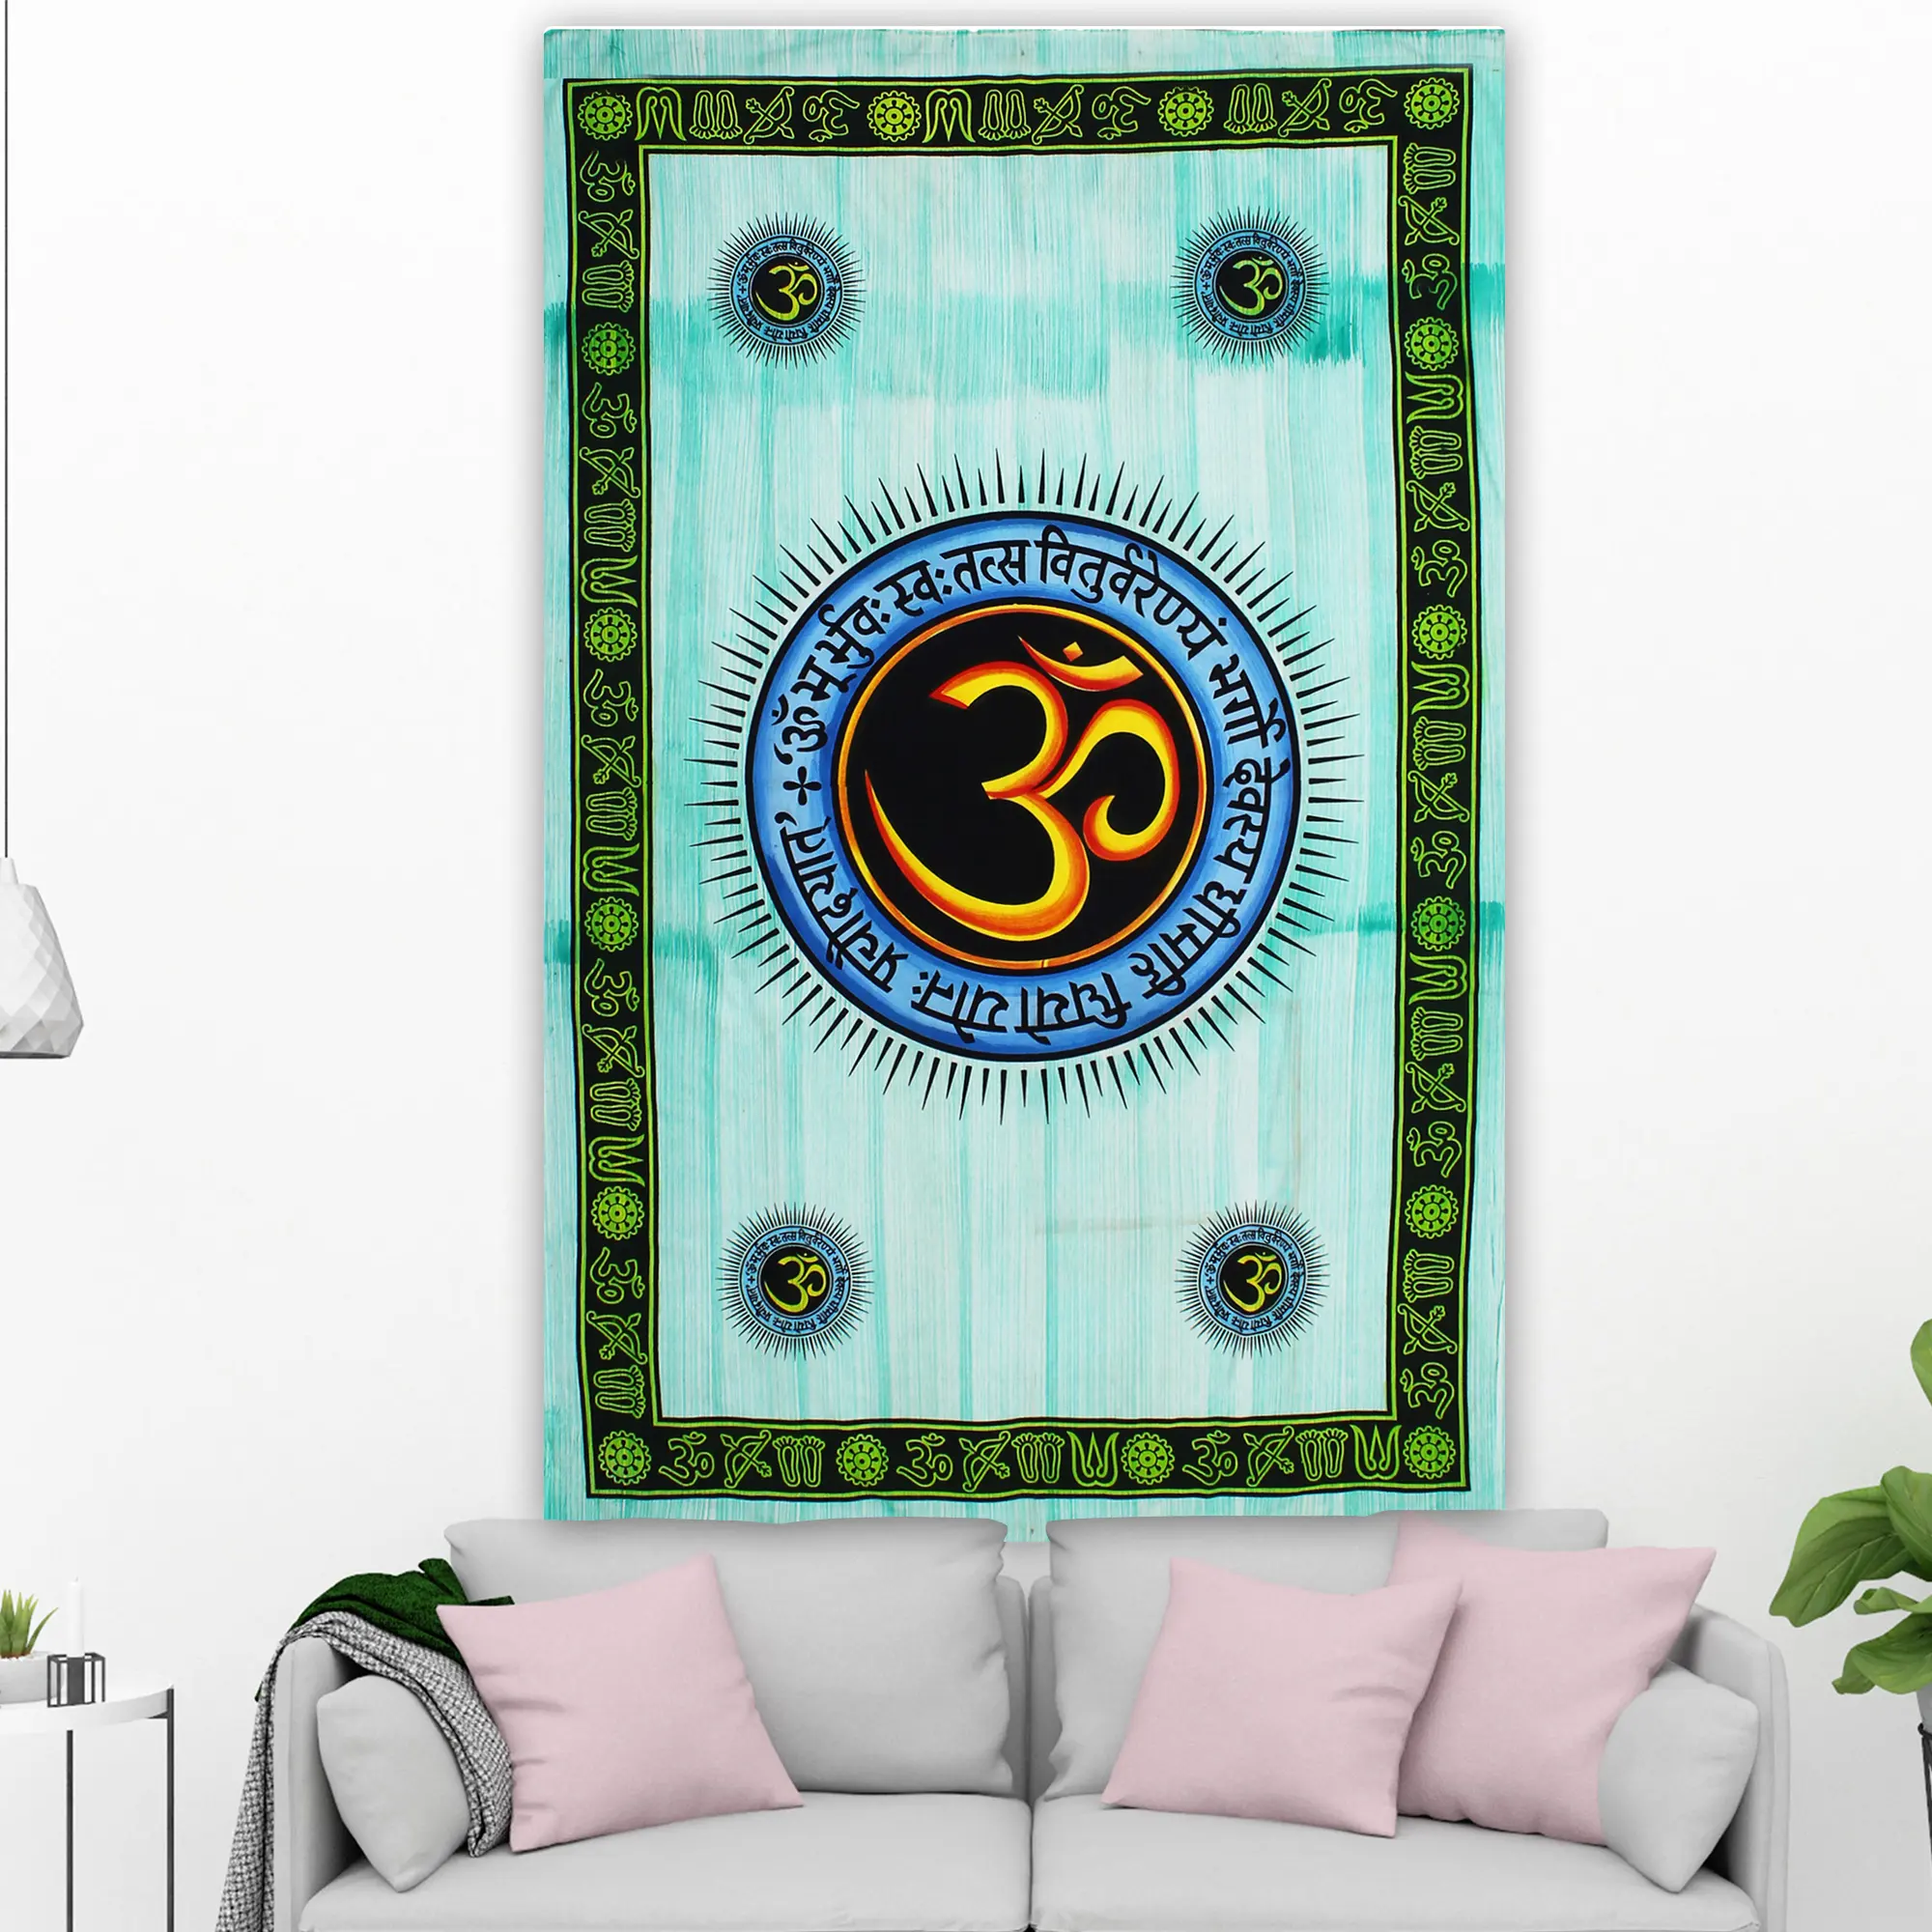 Wall Tapestry Wall Hanging Indian Mandala Tapestry Bohemian Hippie Tapestries 100 % Cotton Bedspread Twin King Size Wall Decor